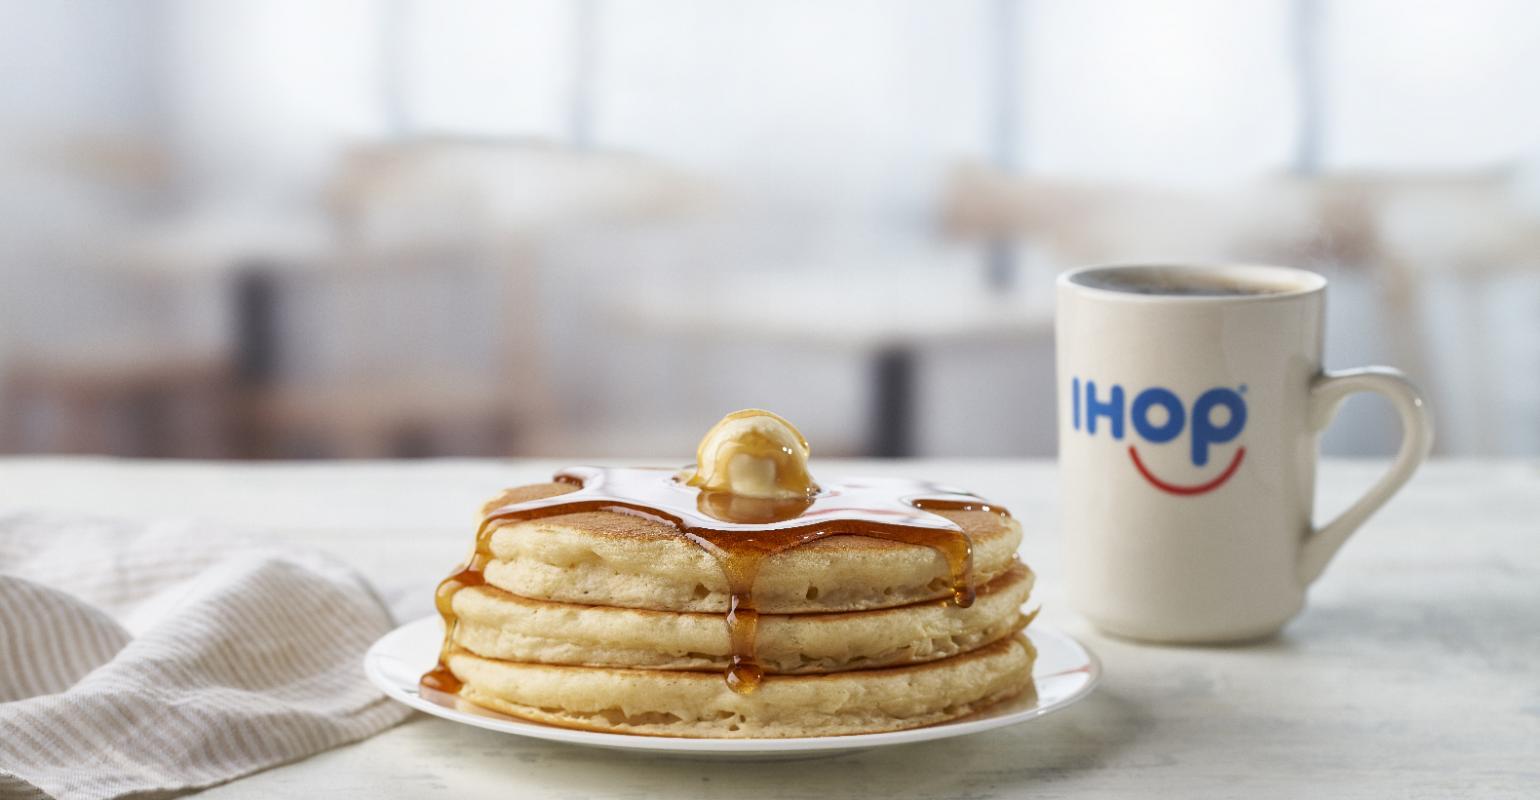 IHOP Has Alot on Its Griddle - Foodservice Equipment Reports Magazine